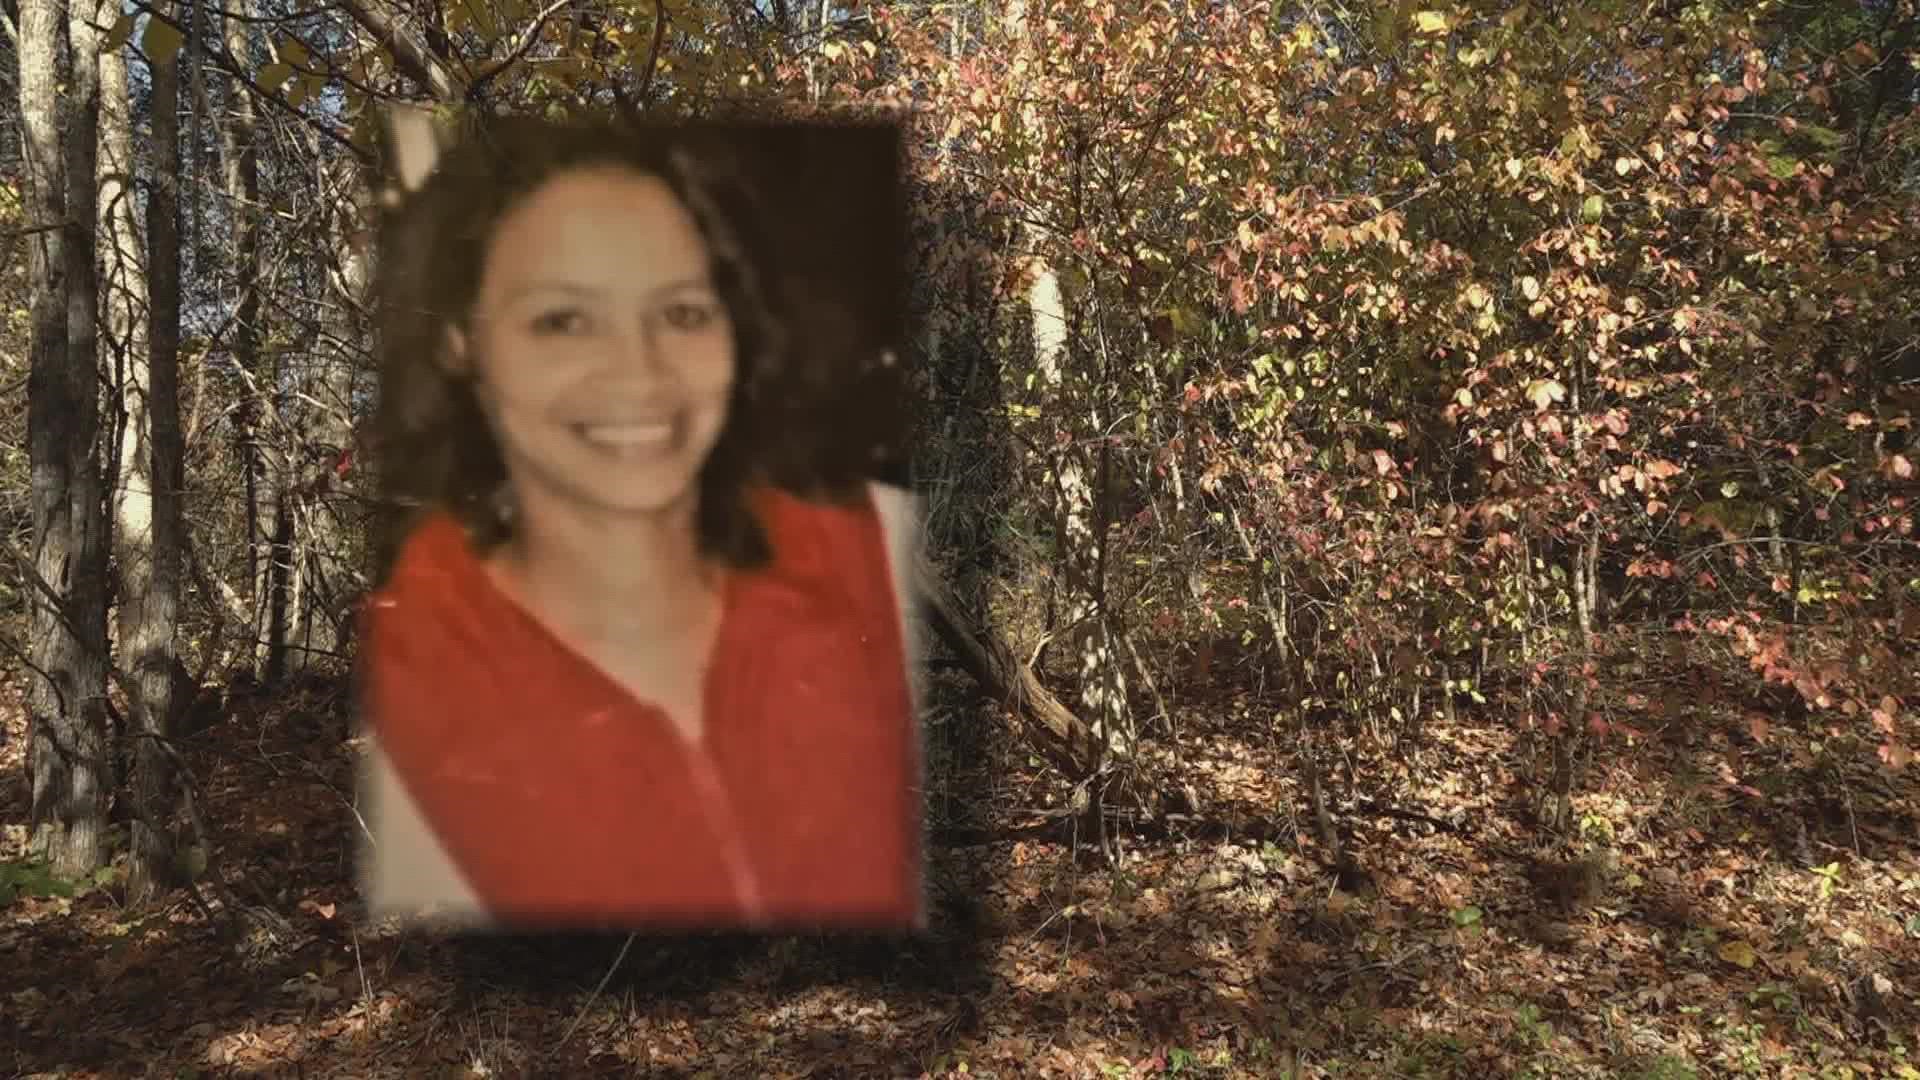 A woman's remains were found in rural Grainger County in 1996. It would take more than 20 years before authorities could say for certain who she was.